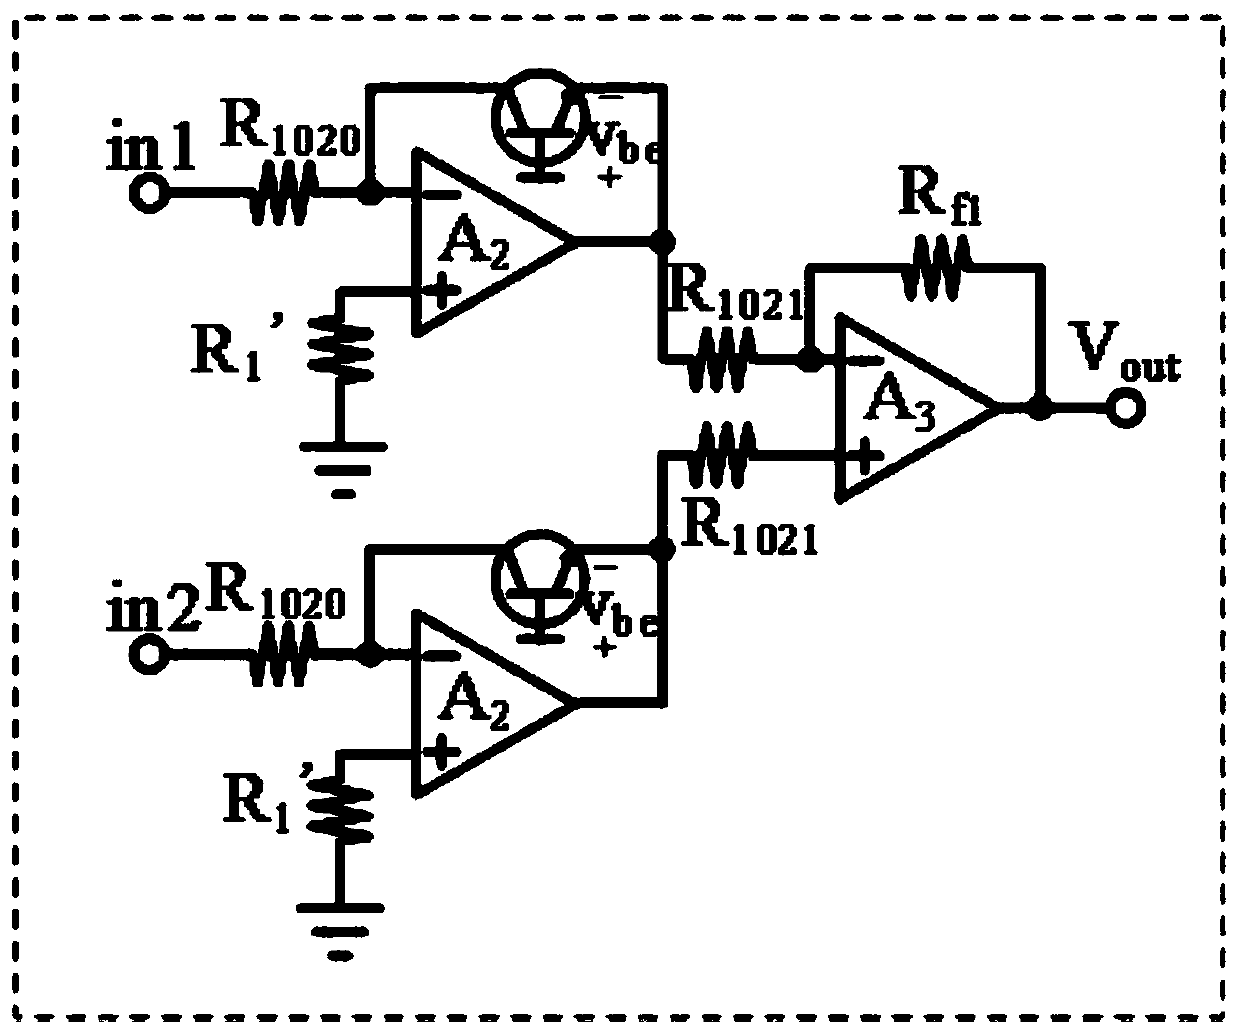 An Uncooled Infrared Focal Plane Array Readout Circuit Based on Exponential Model